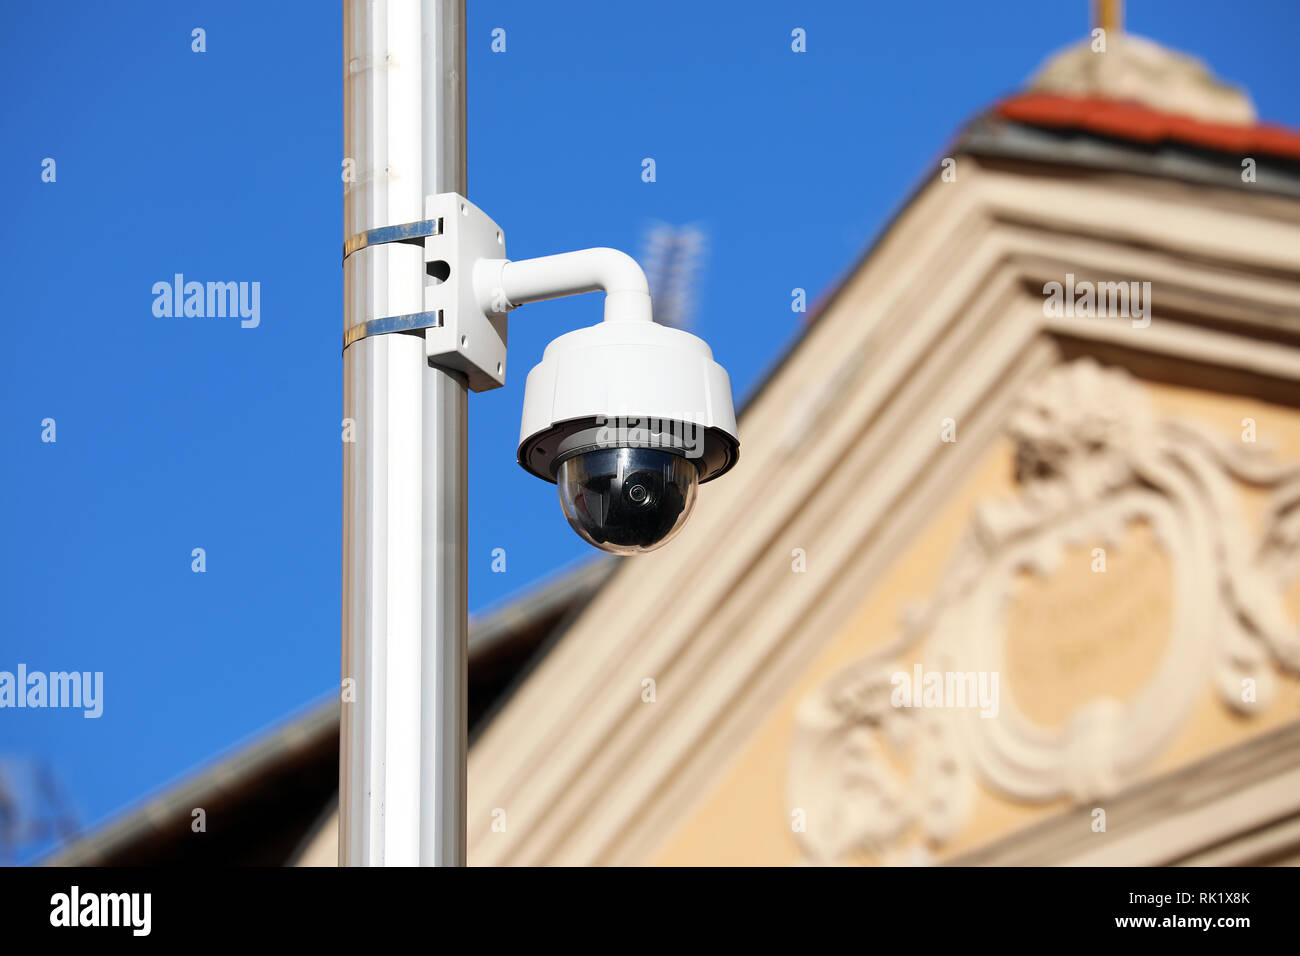 Dome Type Outdoor CCTV Camera On Street Lamp In The City Center Of Nice,  France, Europe Stock Photo - Alamy